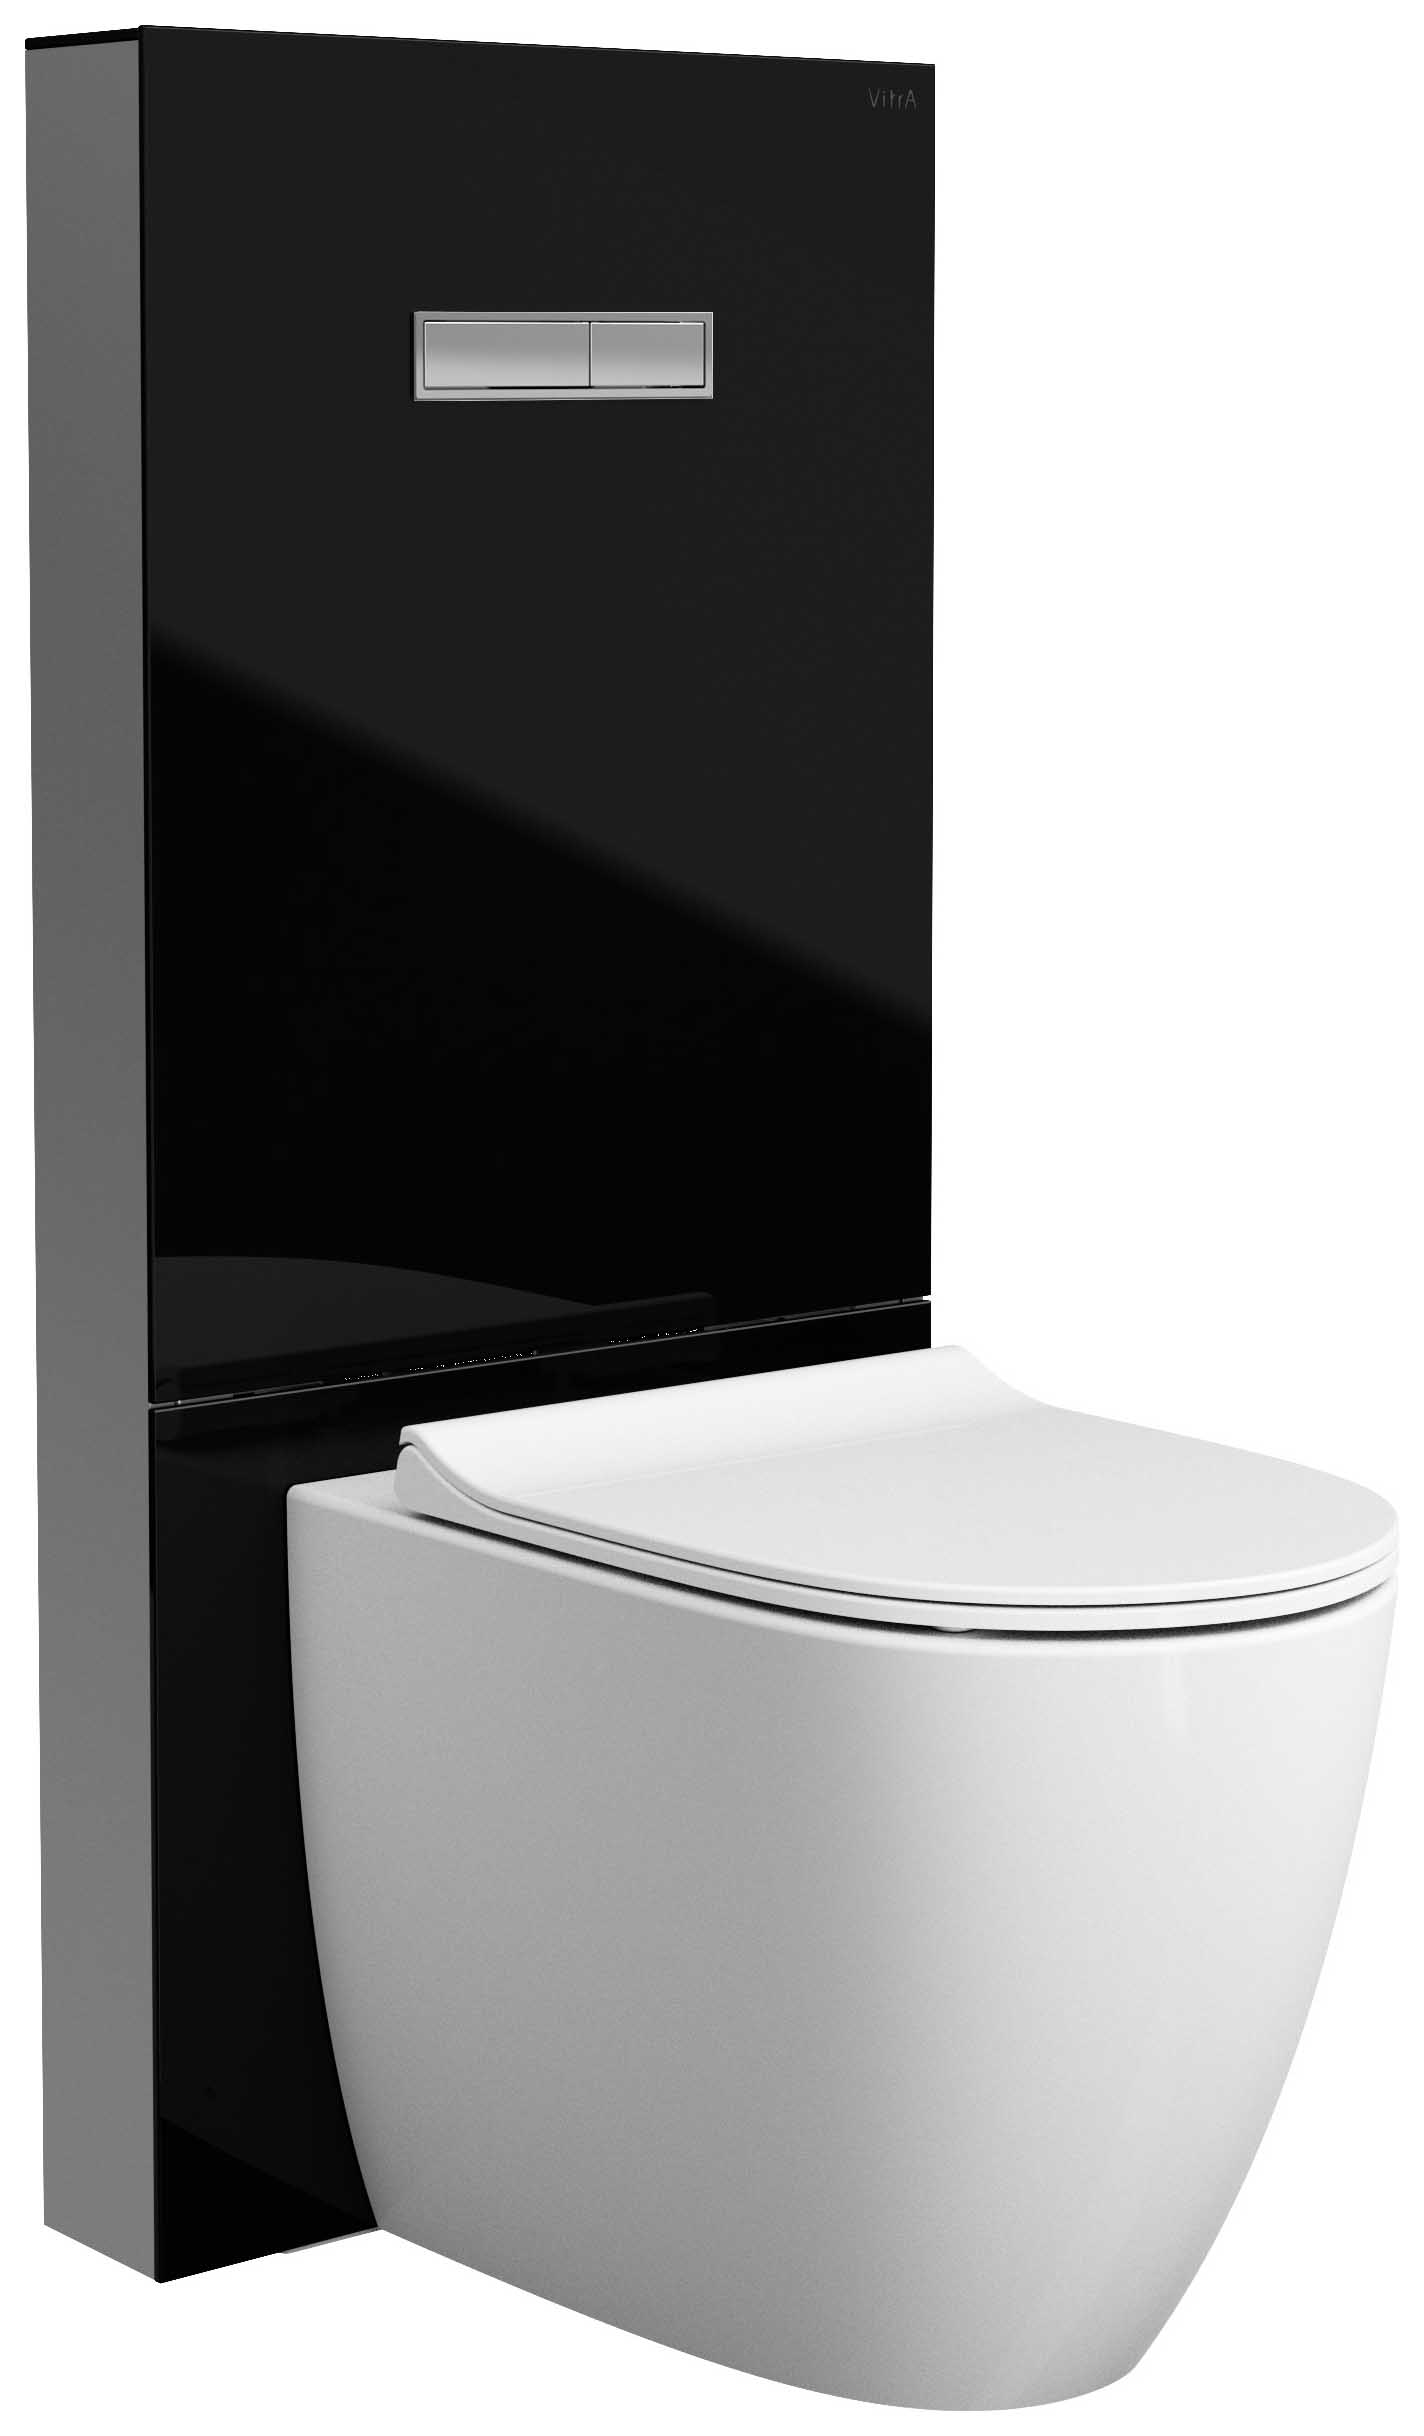 VitrA Vitrus Glass Surround Concealed Cistern for Back To Wall Toilet Pans - Black